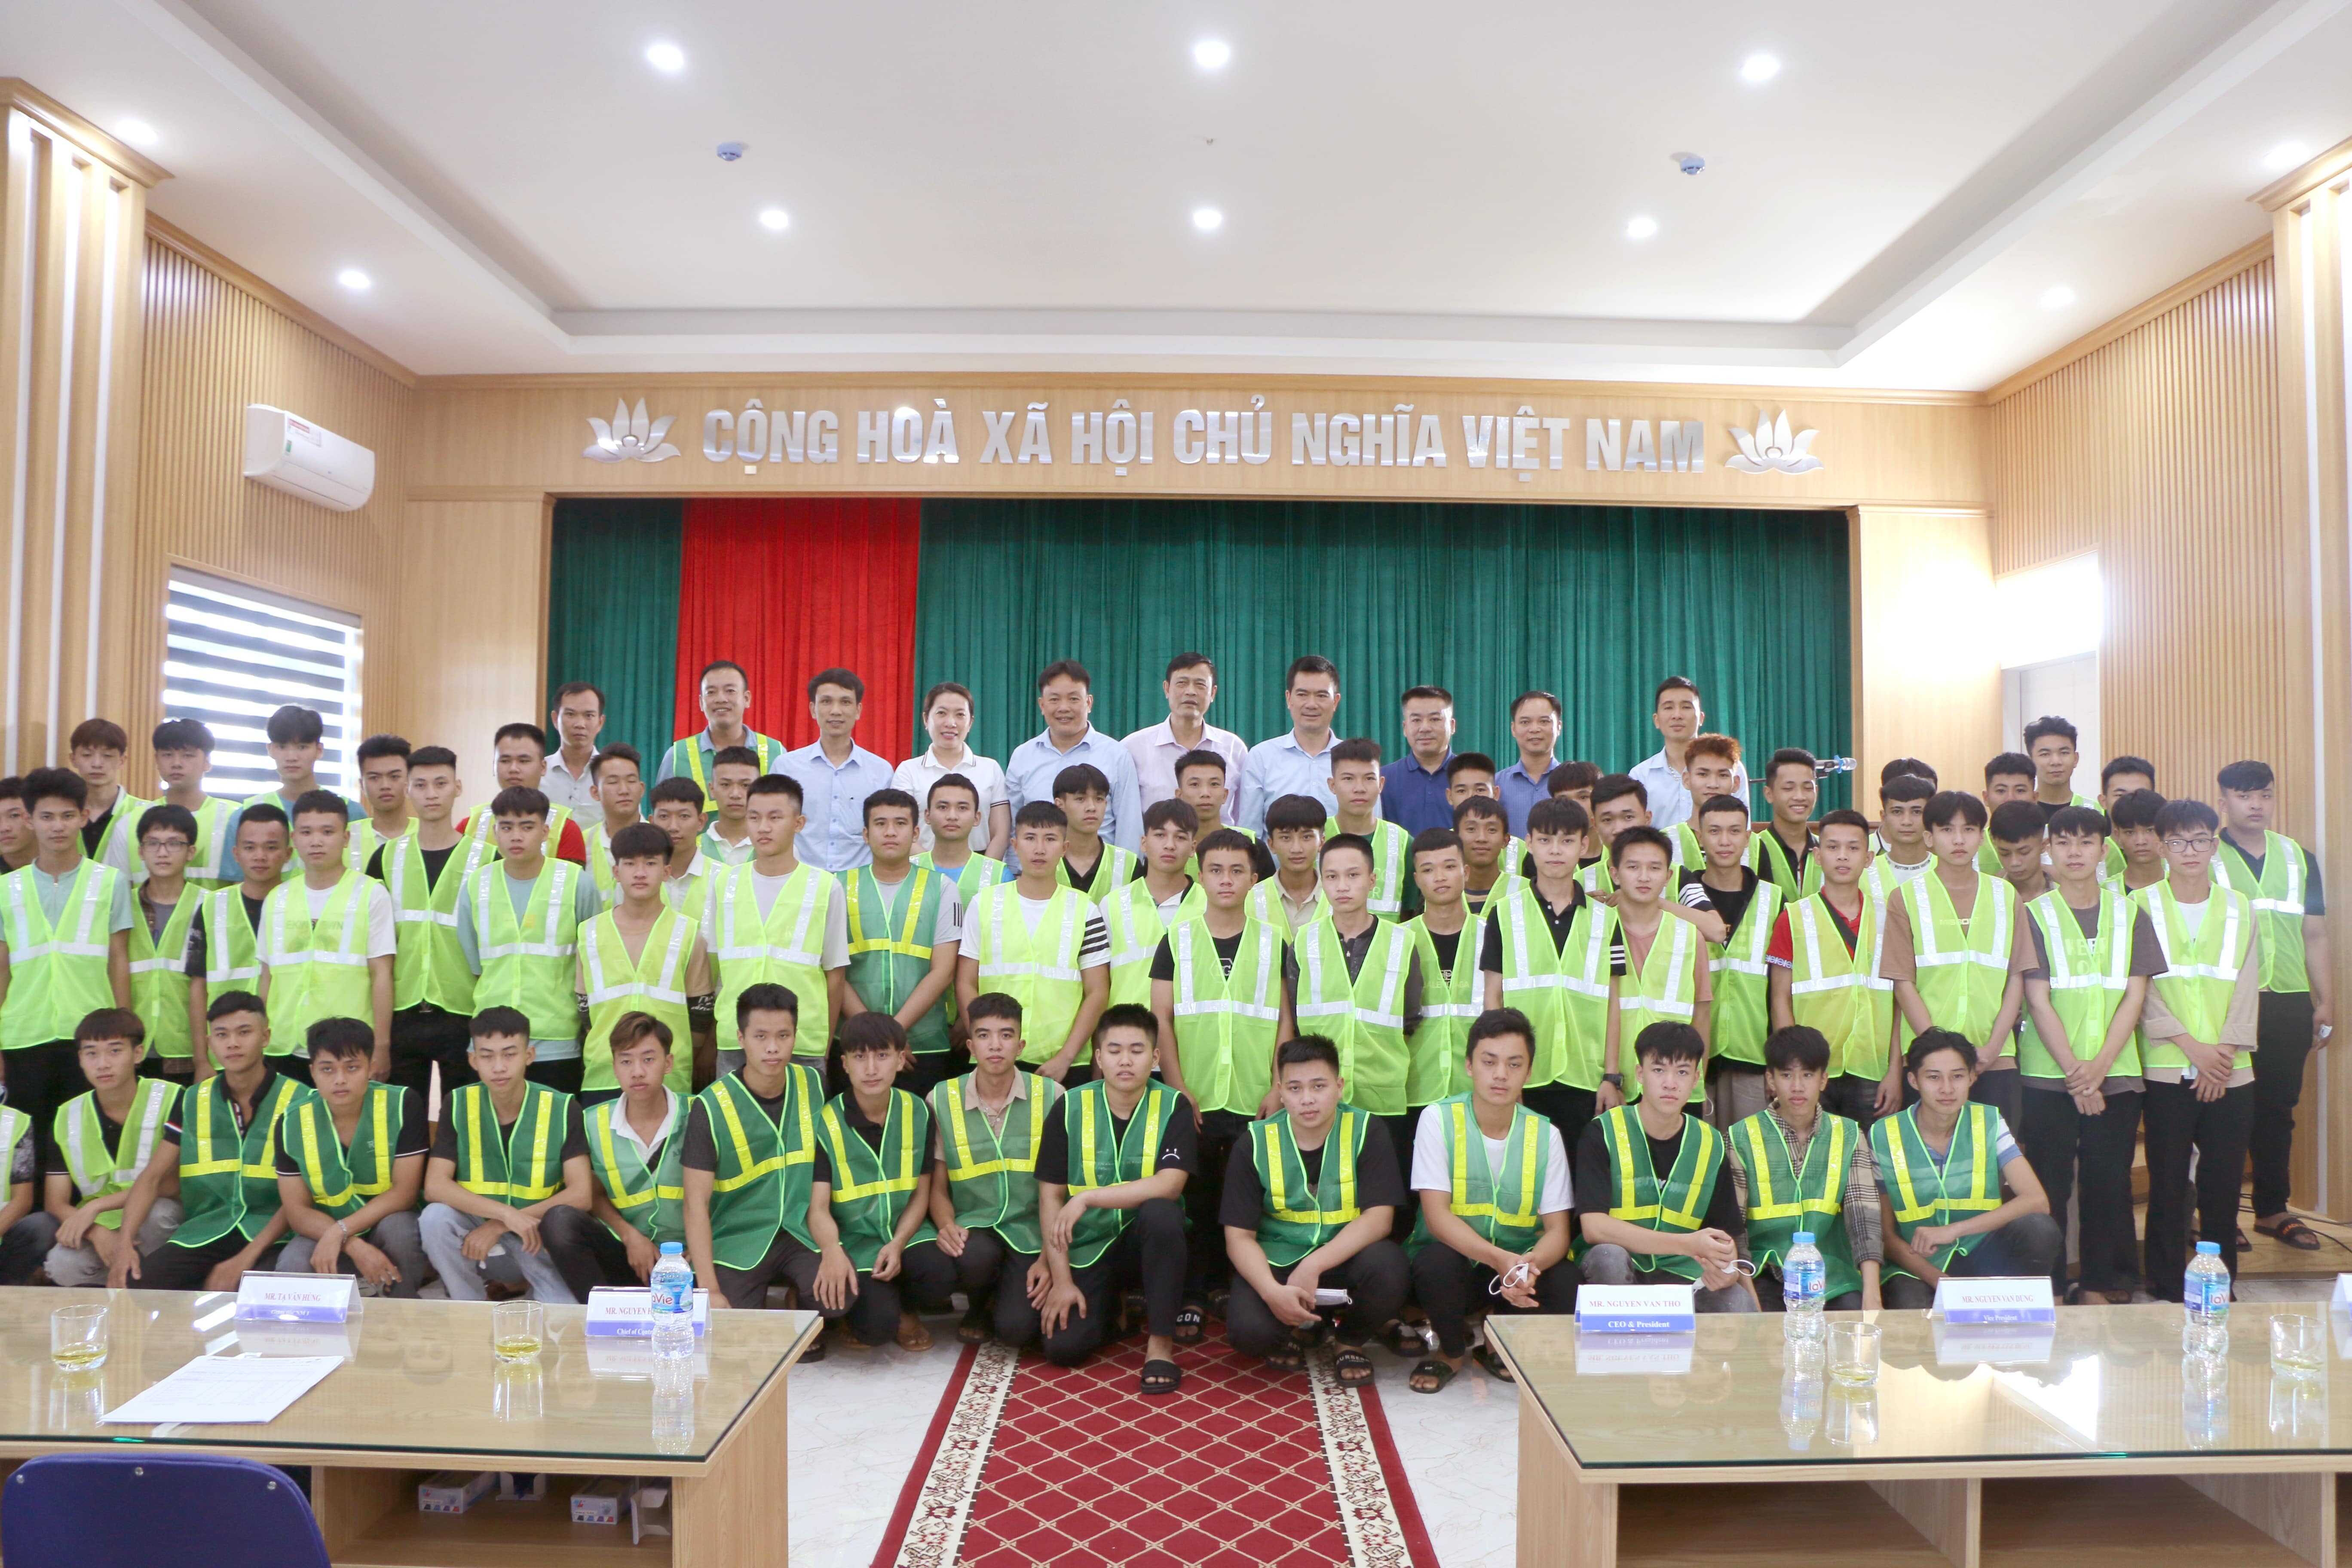 Amecc – Organizing meets and career orientations for new technical workers and student interns